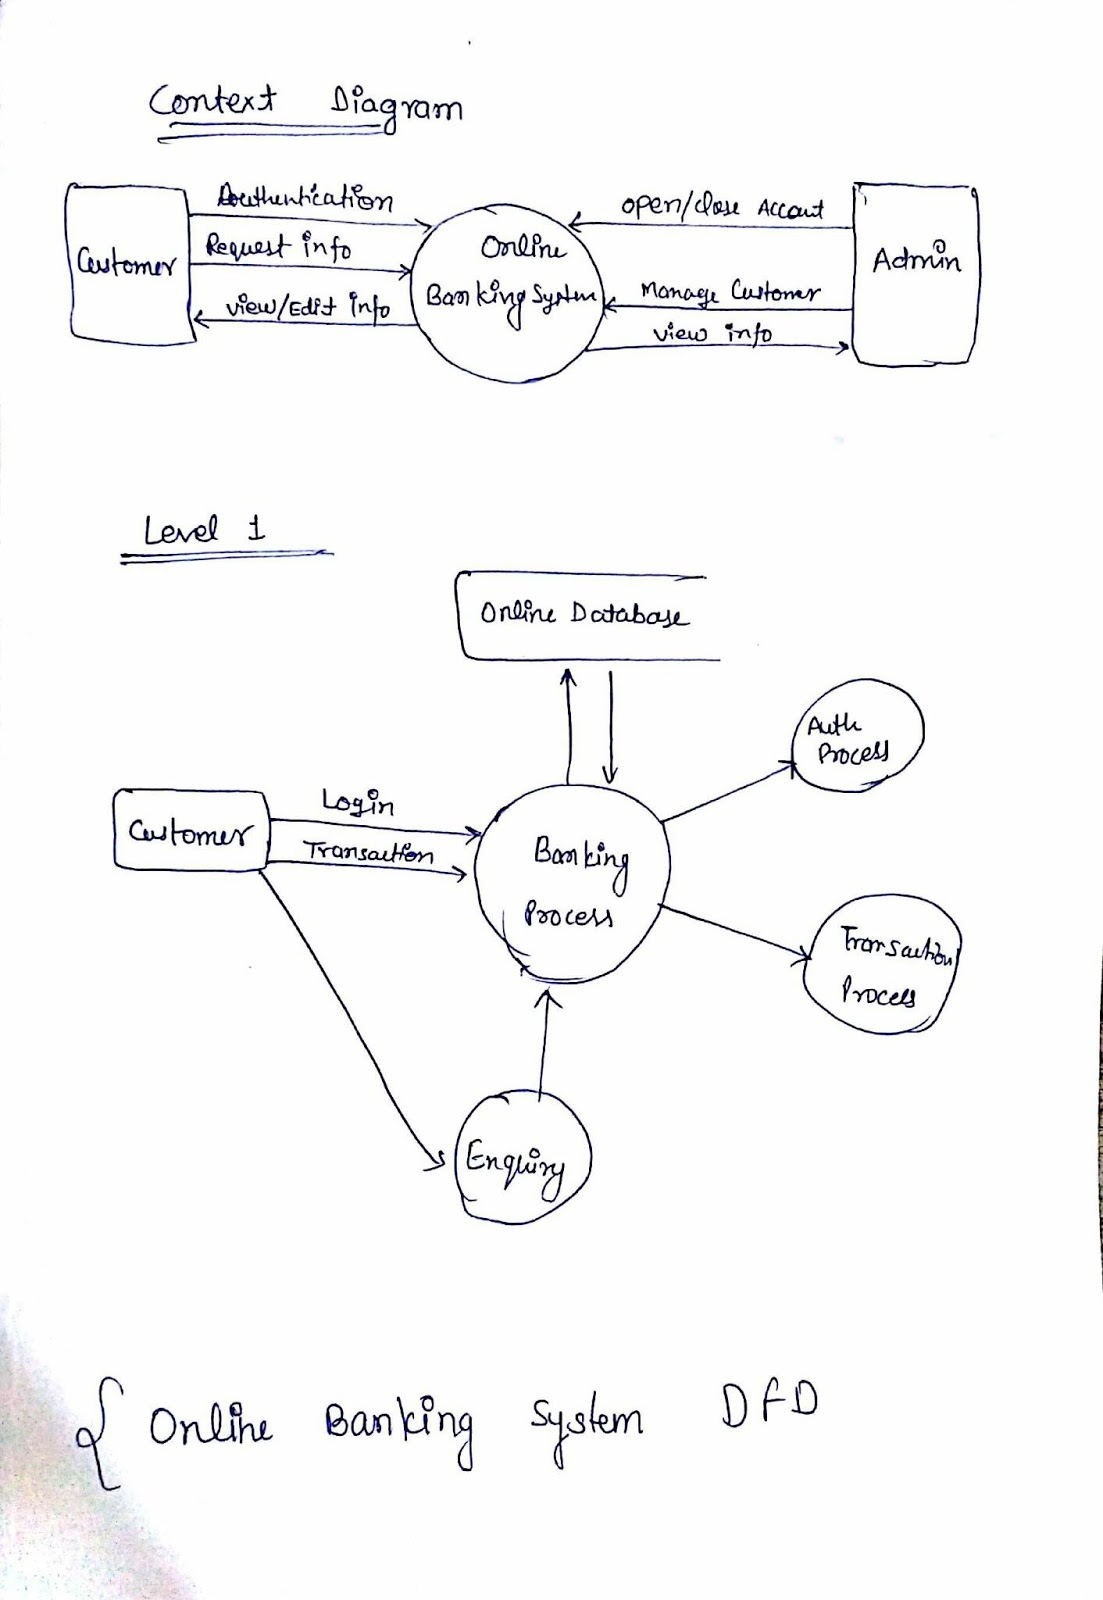 Draw A Dfd For Online Banking System. Make Necessary with regard to Draw An Er Diagram For Banking System